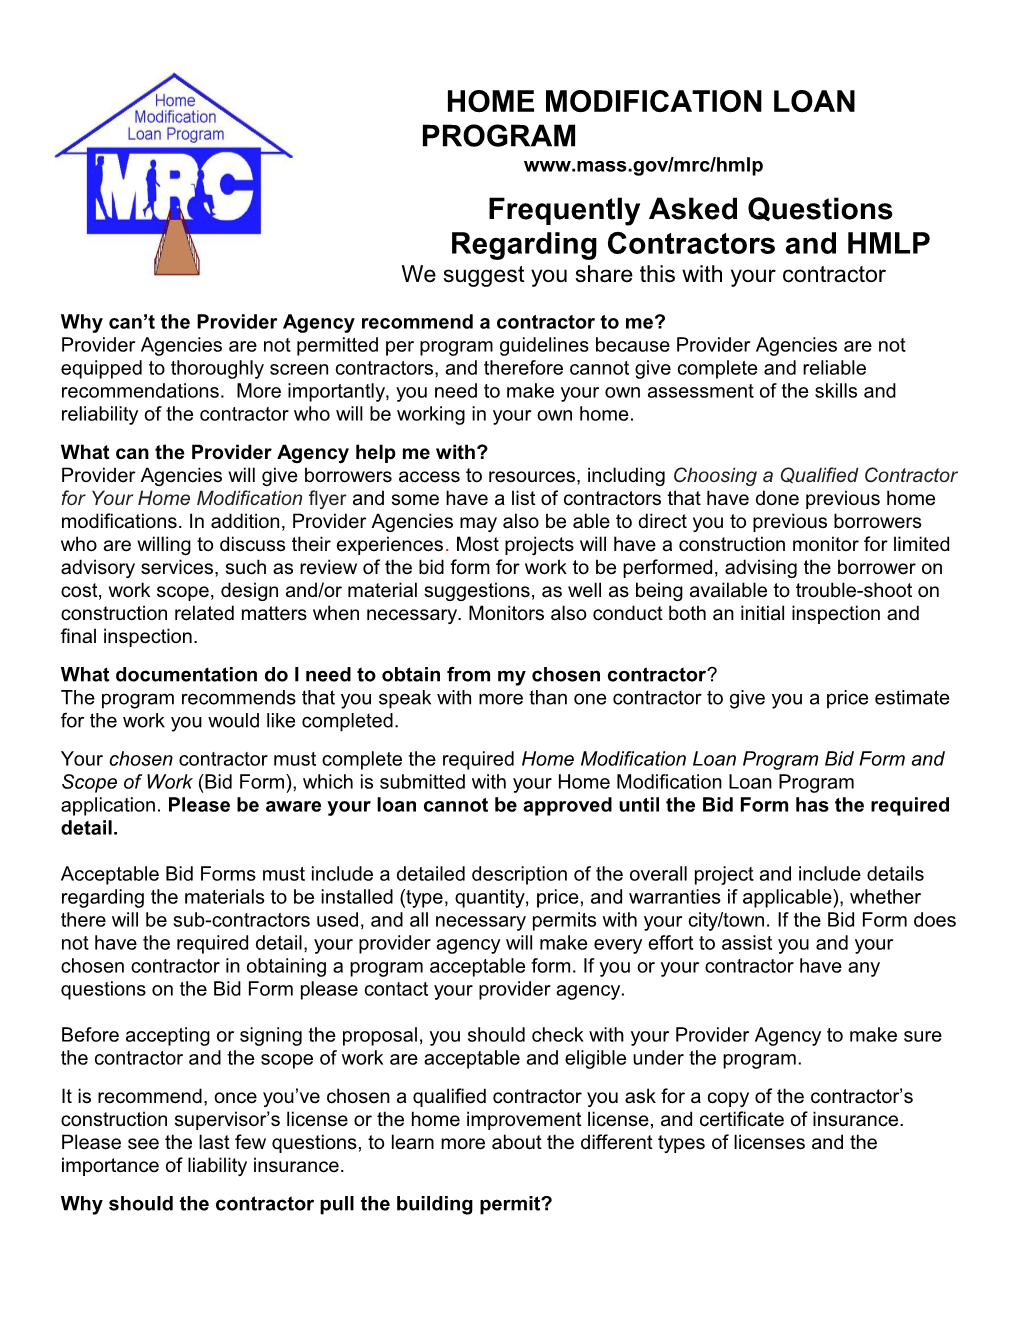 Frequently Asked Questions Regarding the Contractor Borrower Relationship